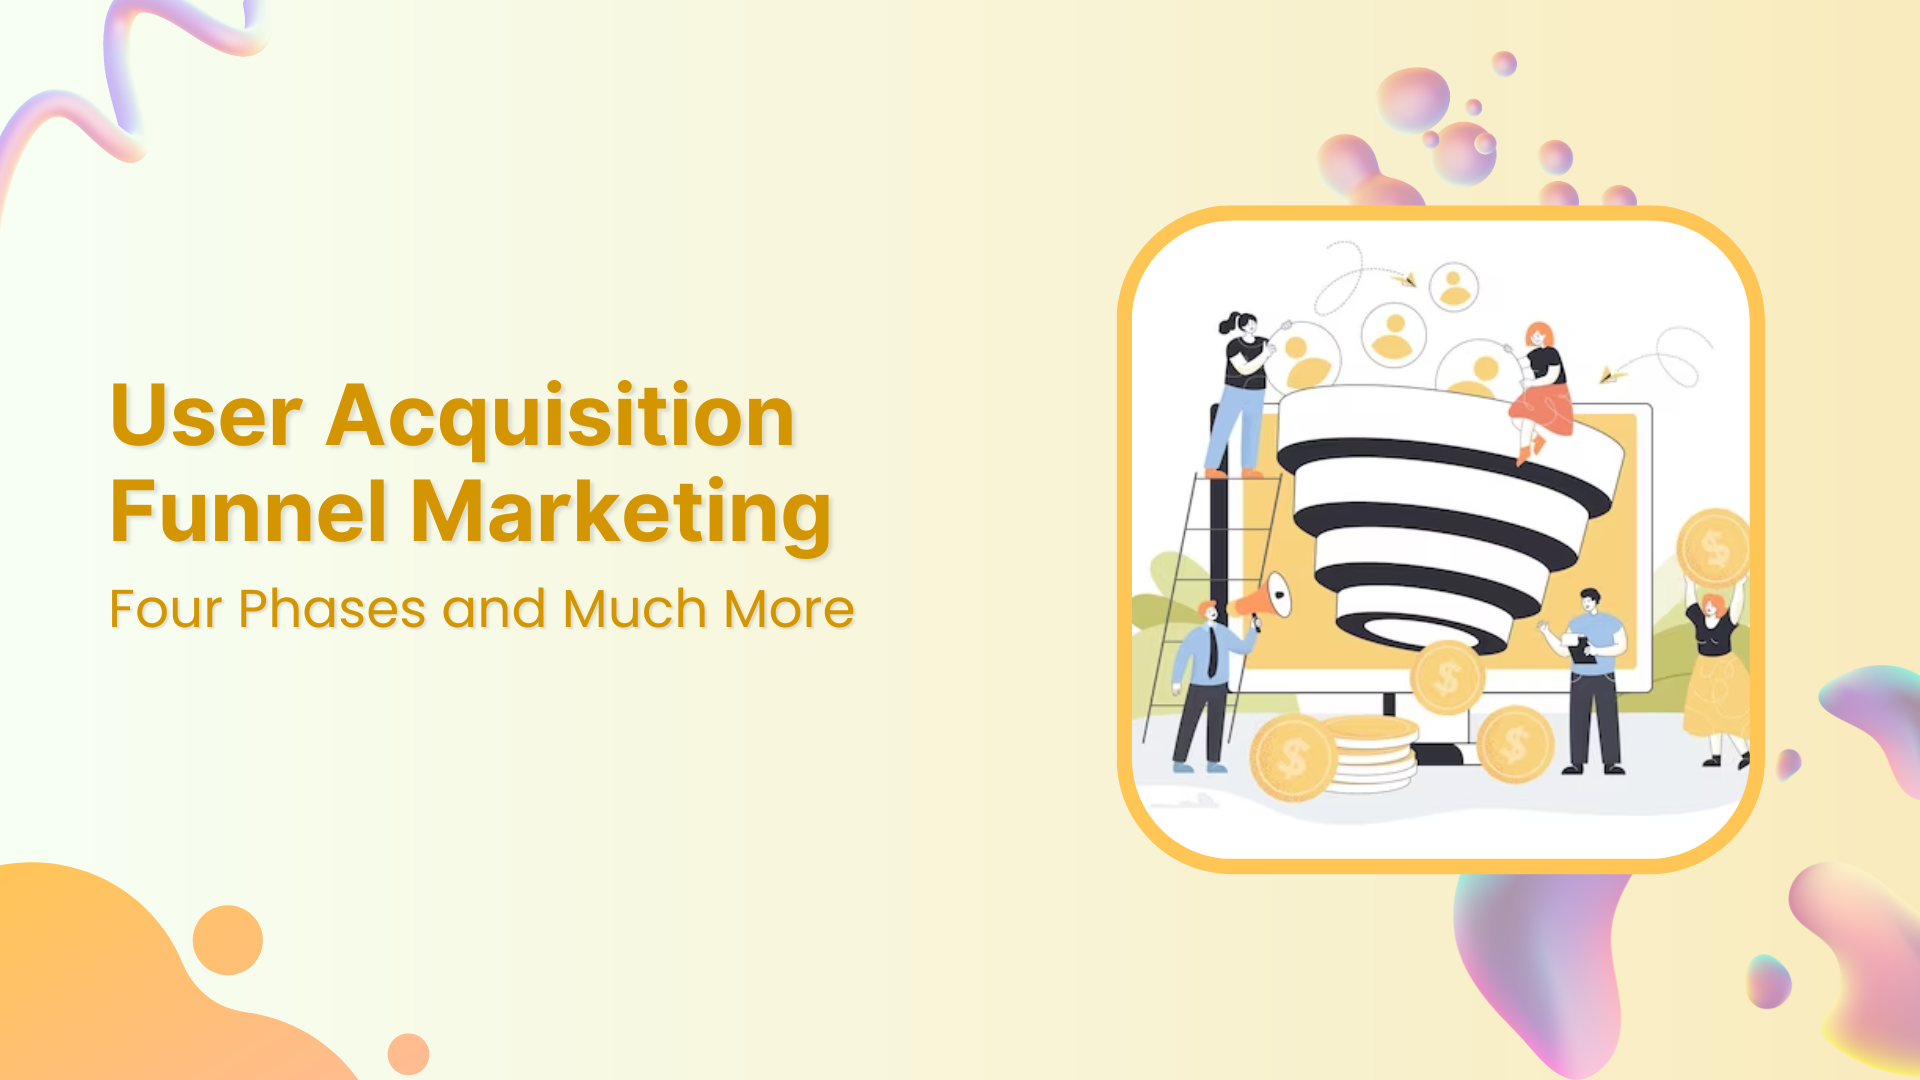 phases of user acquisition funnel marketing